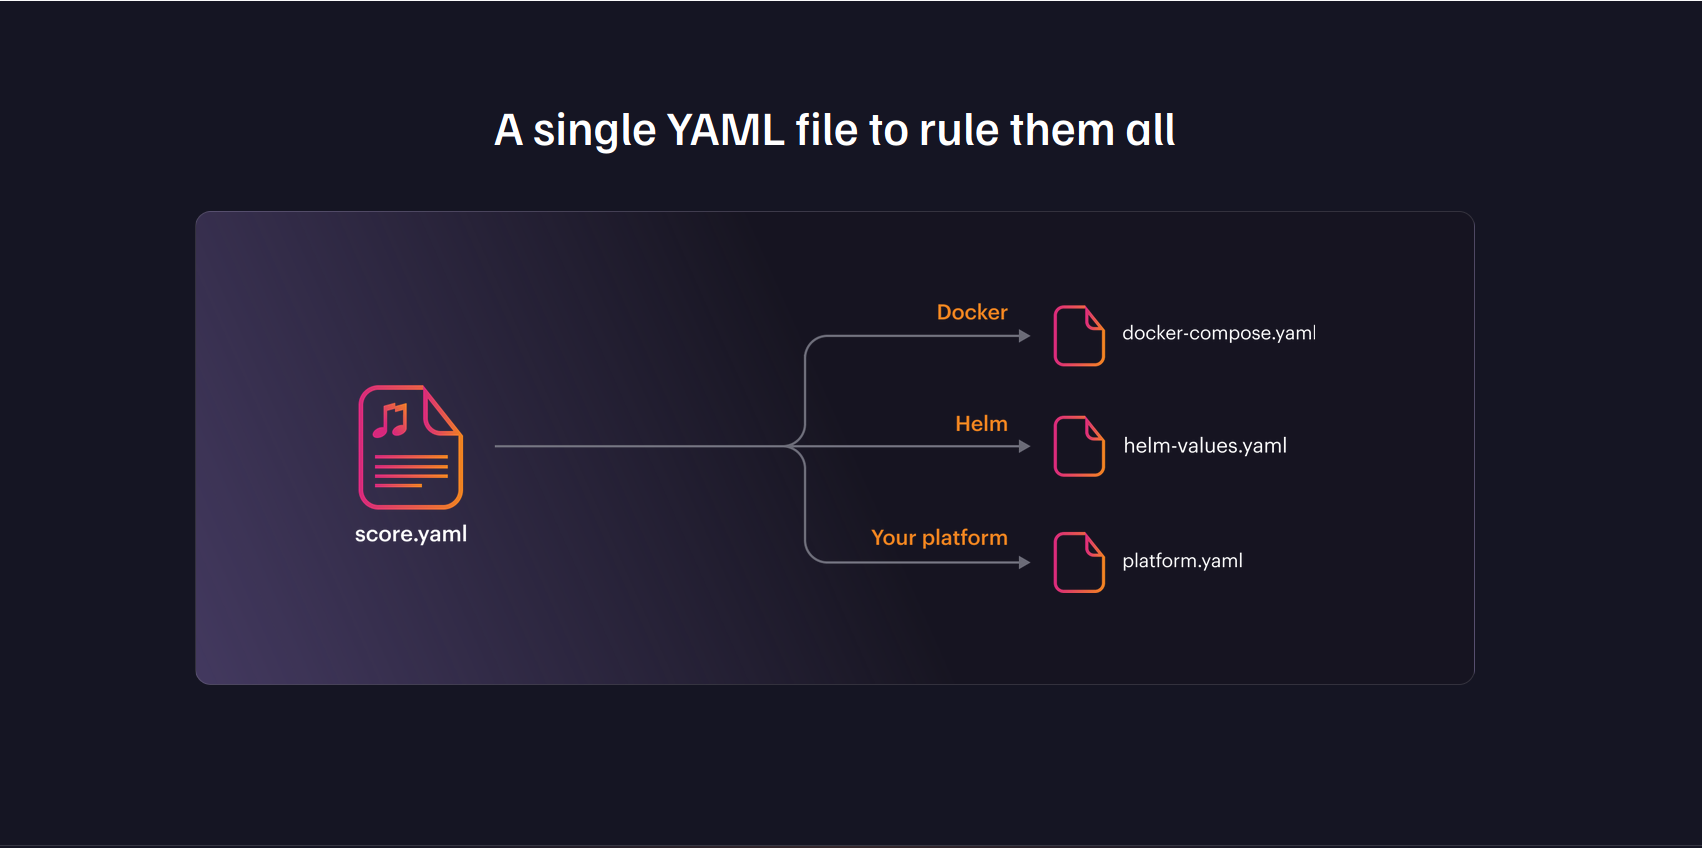 One YAML to rule them all. We just open sourced a new workload